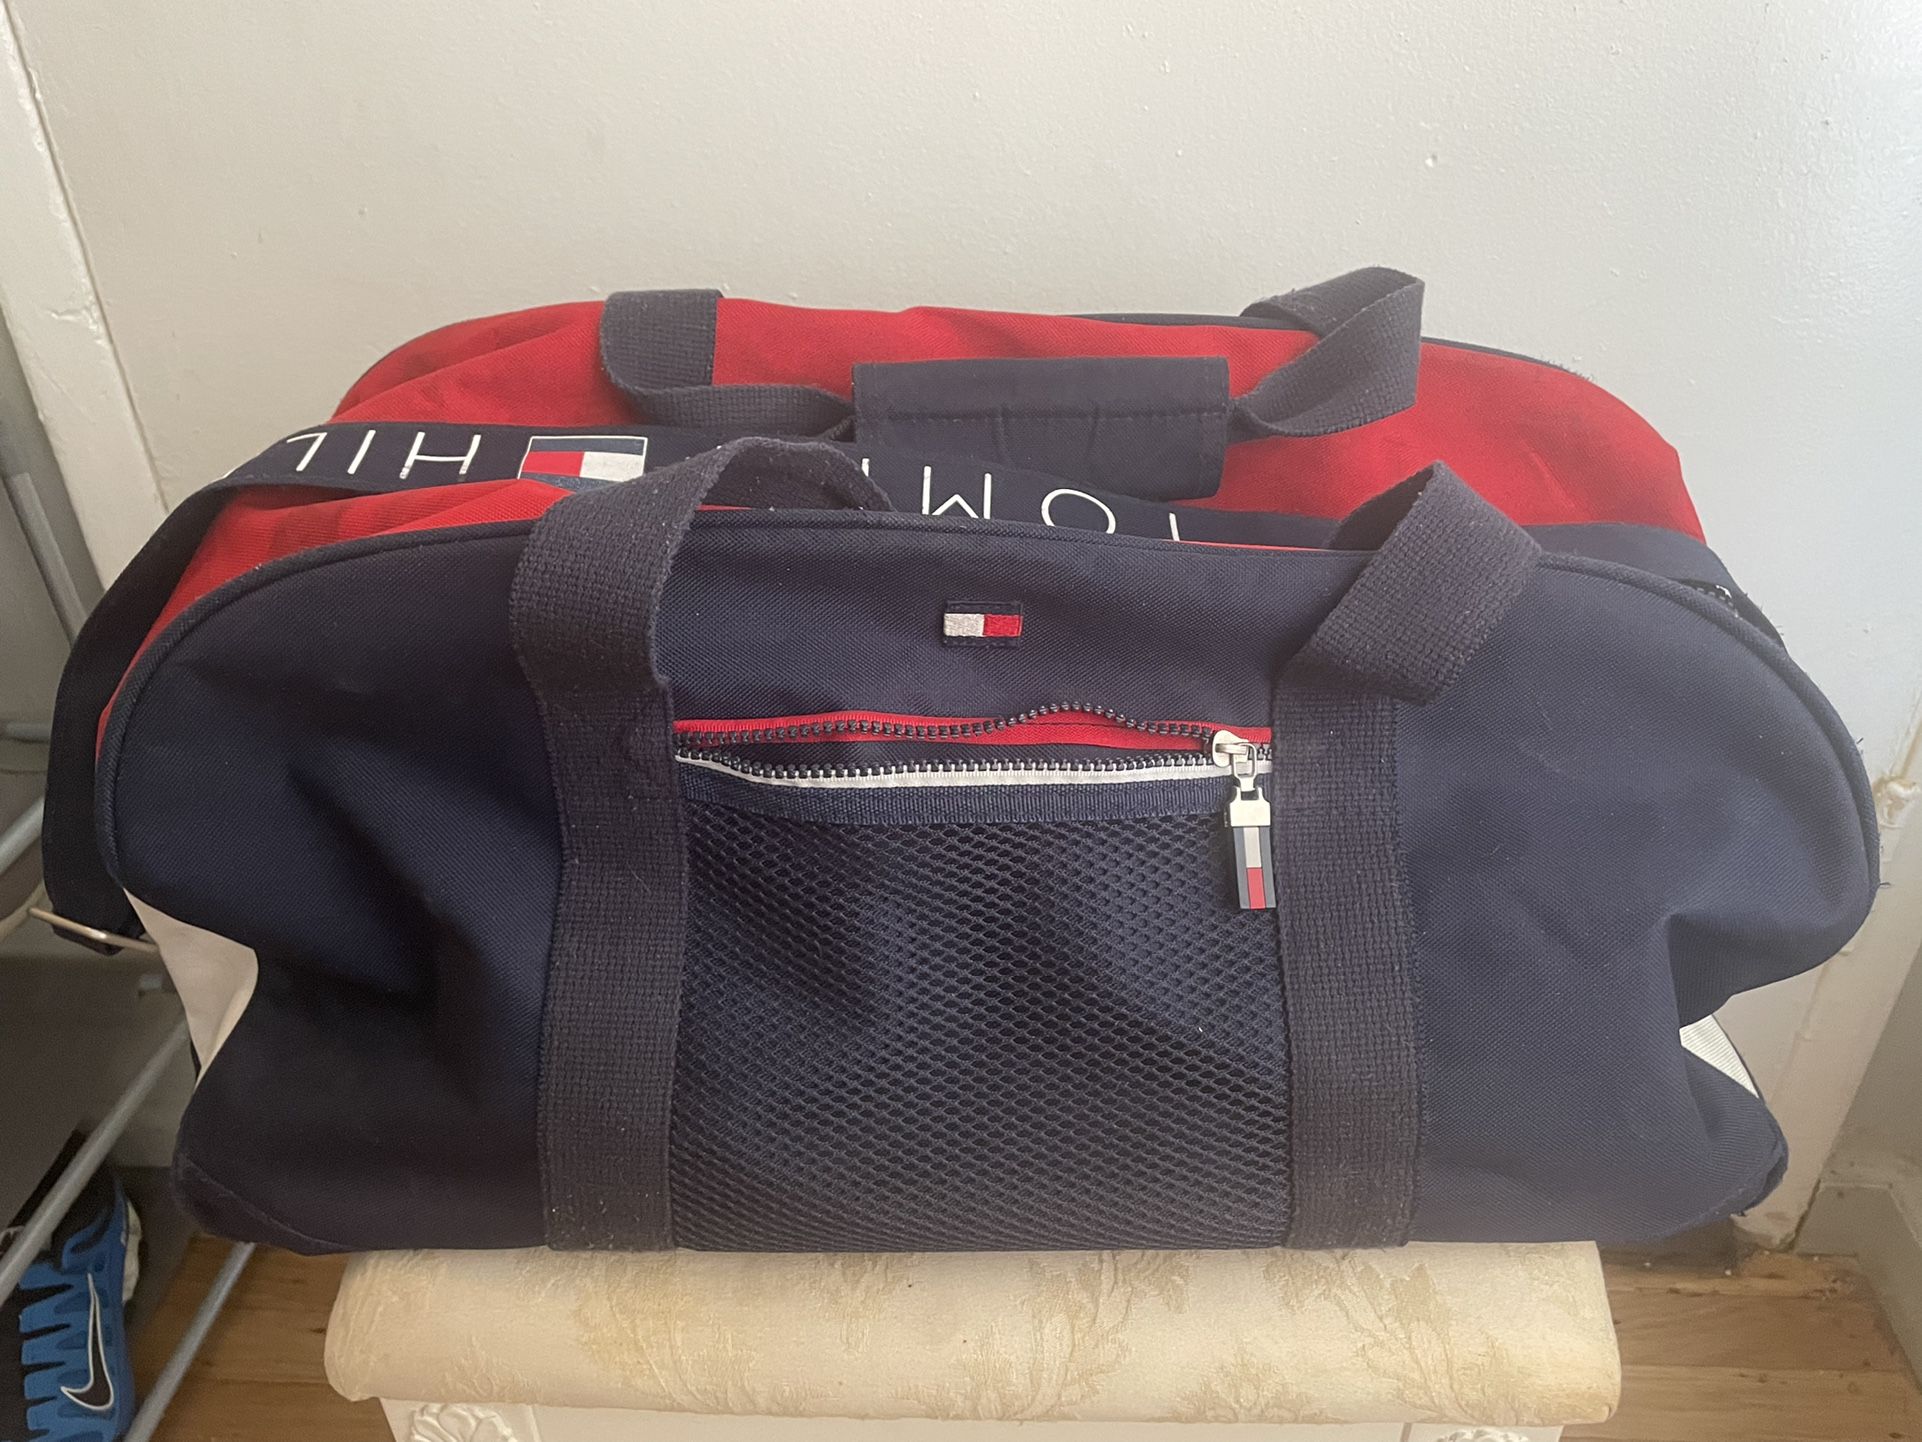 Tommy Hilfiger Large Canvas Duffle Bag - Feel Free To Ask Questions